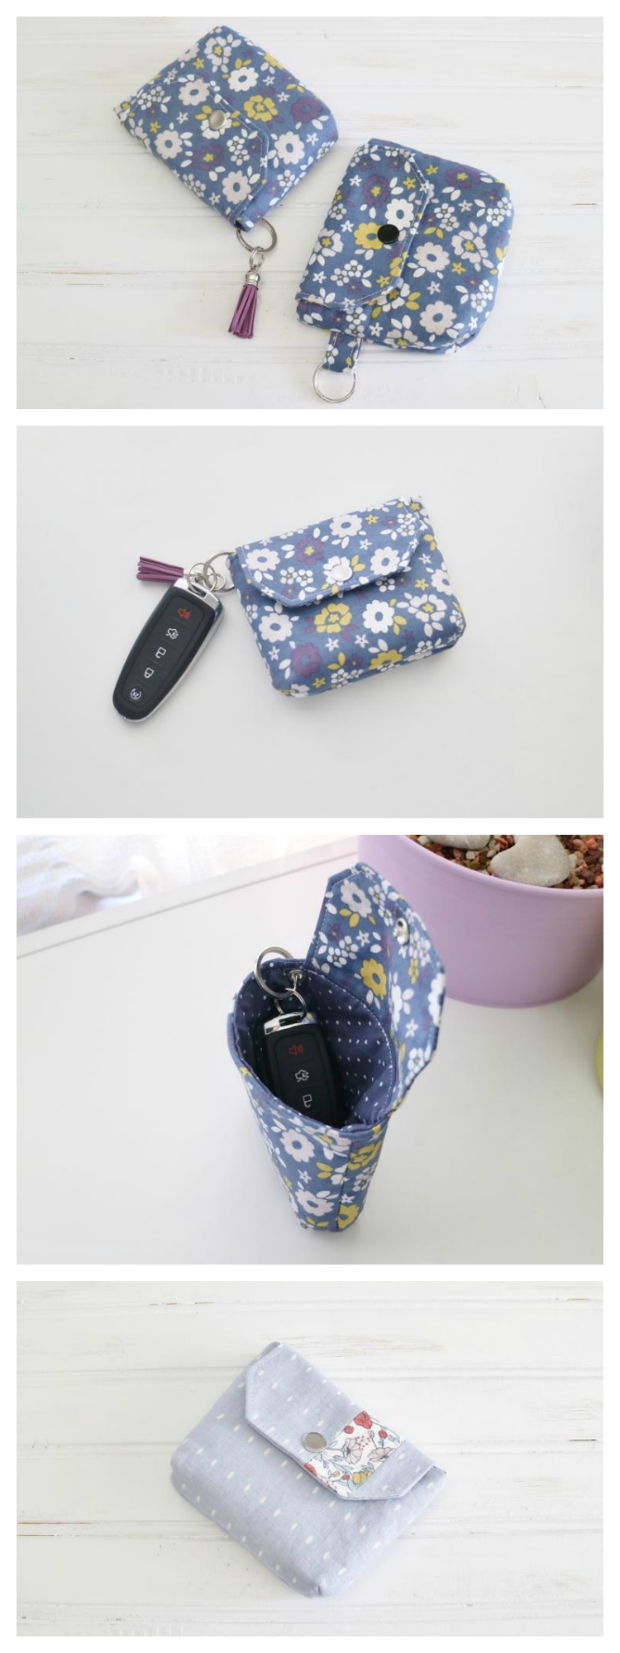 Flappy Coin Purse - FREE sewing pattern.